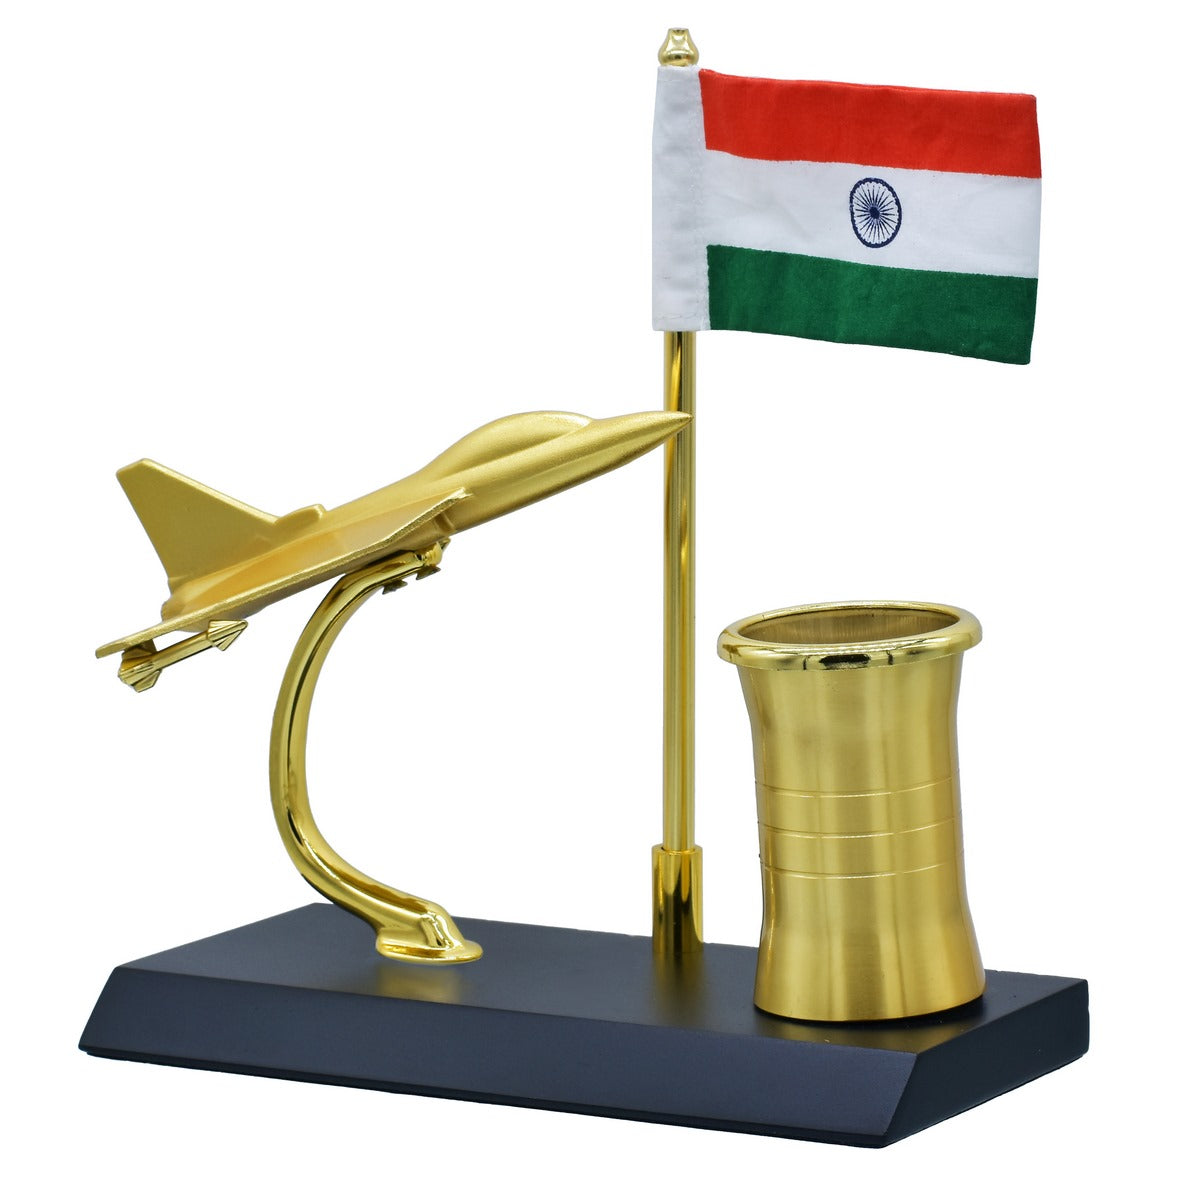 Golden Table Top Desktop Indian Flag With Air Craft and Pen Stand - For Independence Day Gift, Republic Day Gift, Corporate Gifts for Employees, Dealers, Customers, Stakeholders JATT668GD